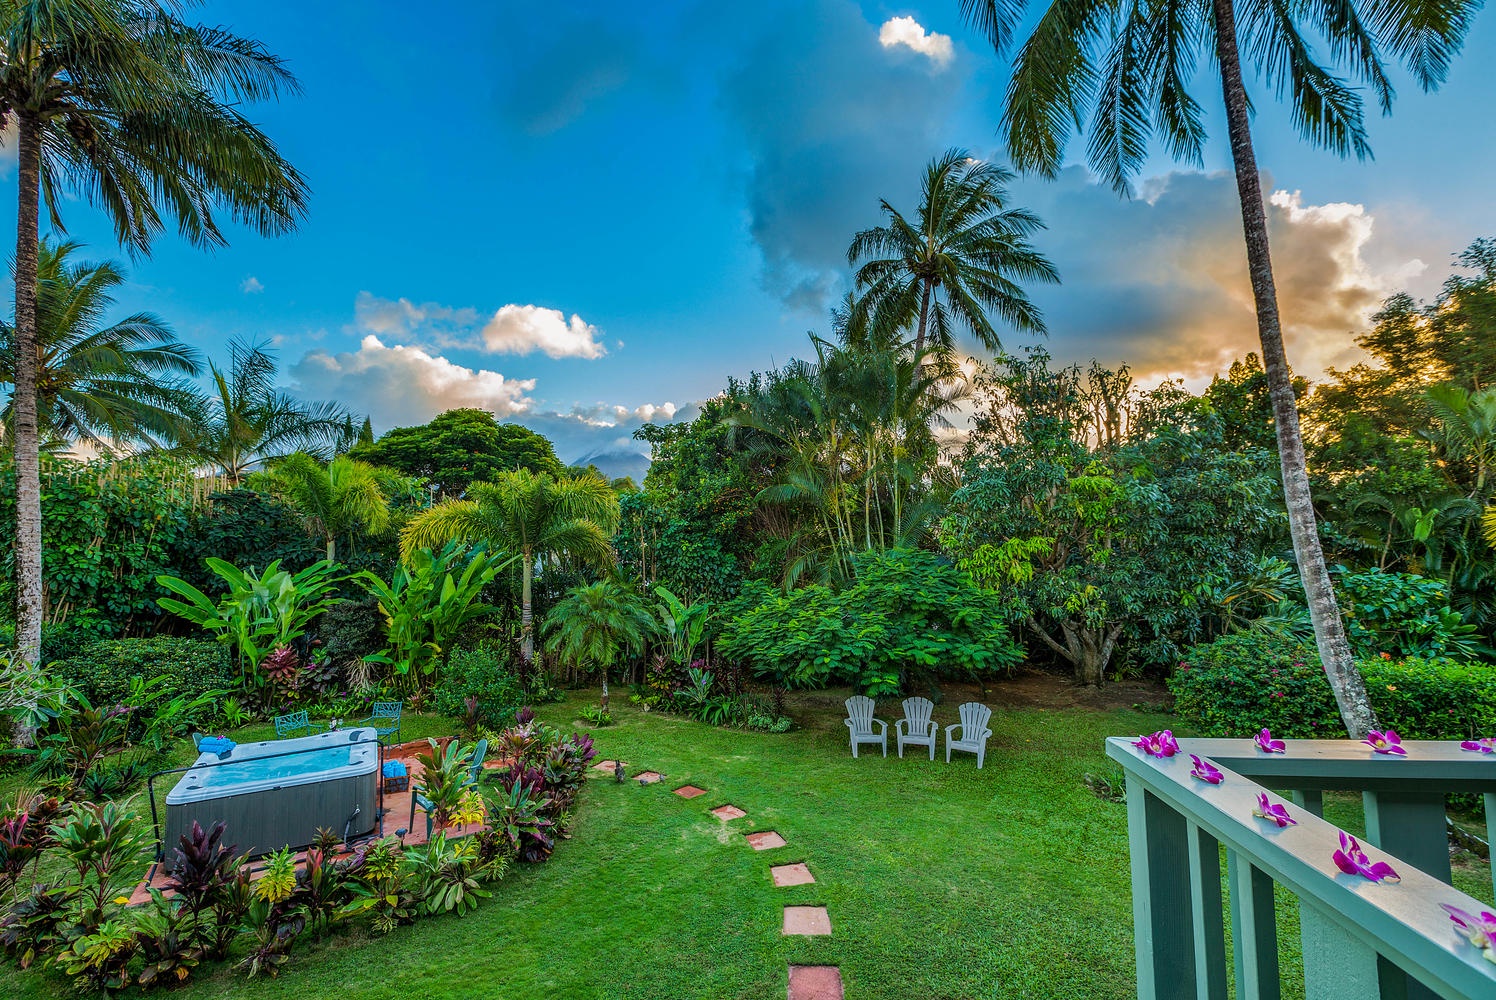 Princeville Vacation Rentals, Hale Anu Keanu - View from the back lanai... mountains and garden at sunset.